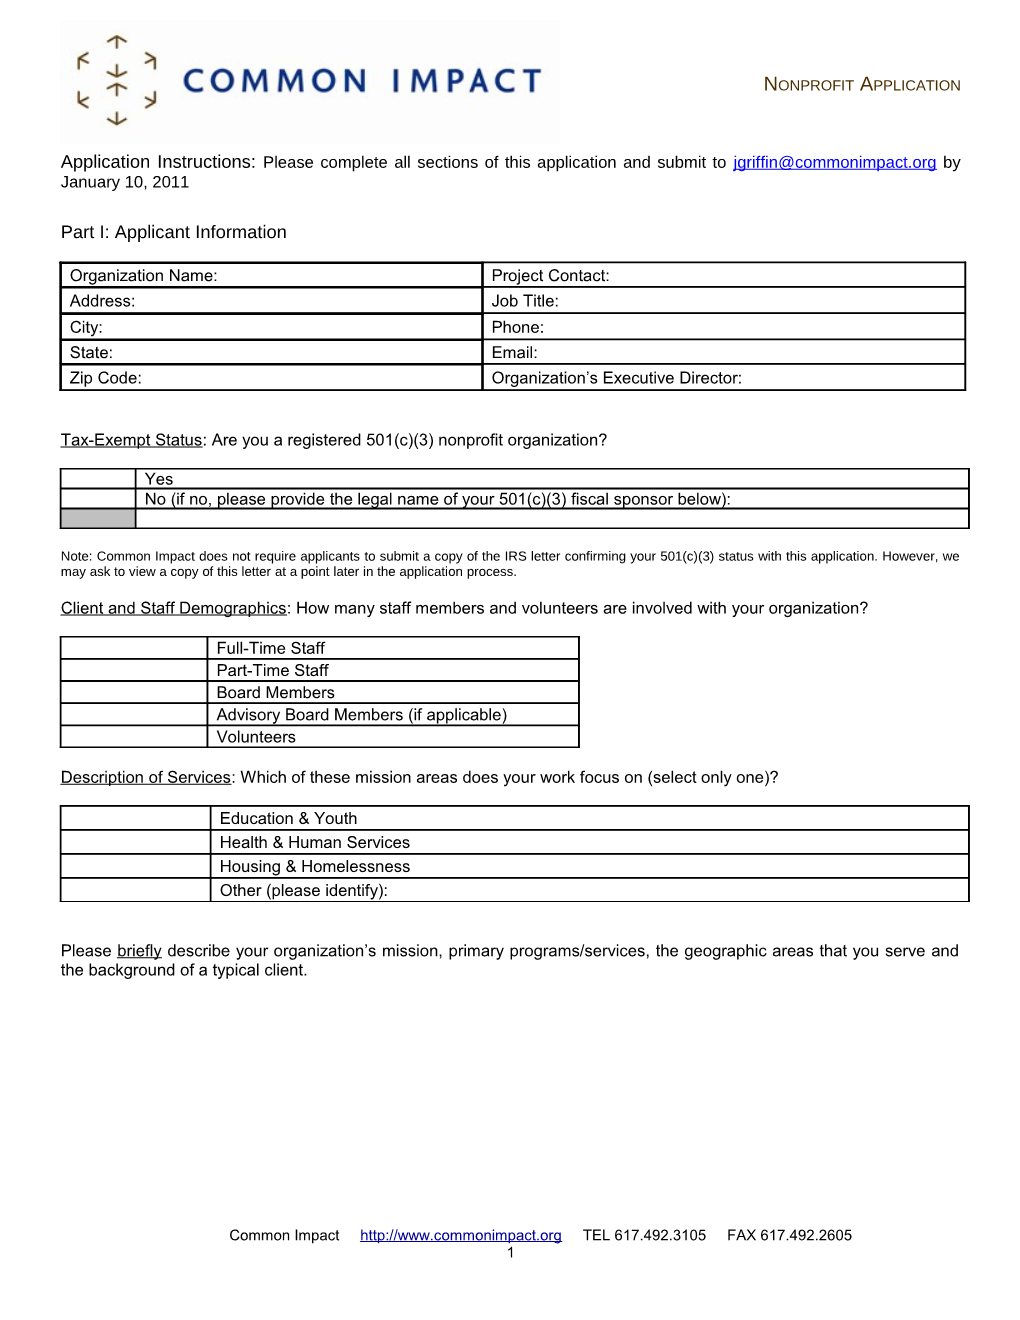 Application Instructions: Please Complete All Sections of This Form